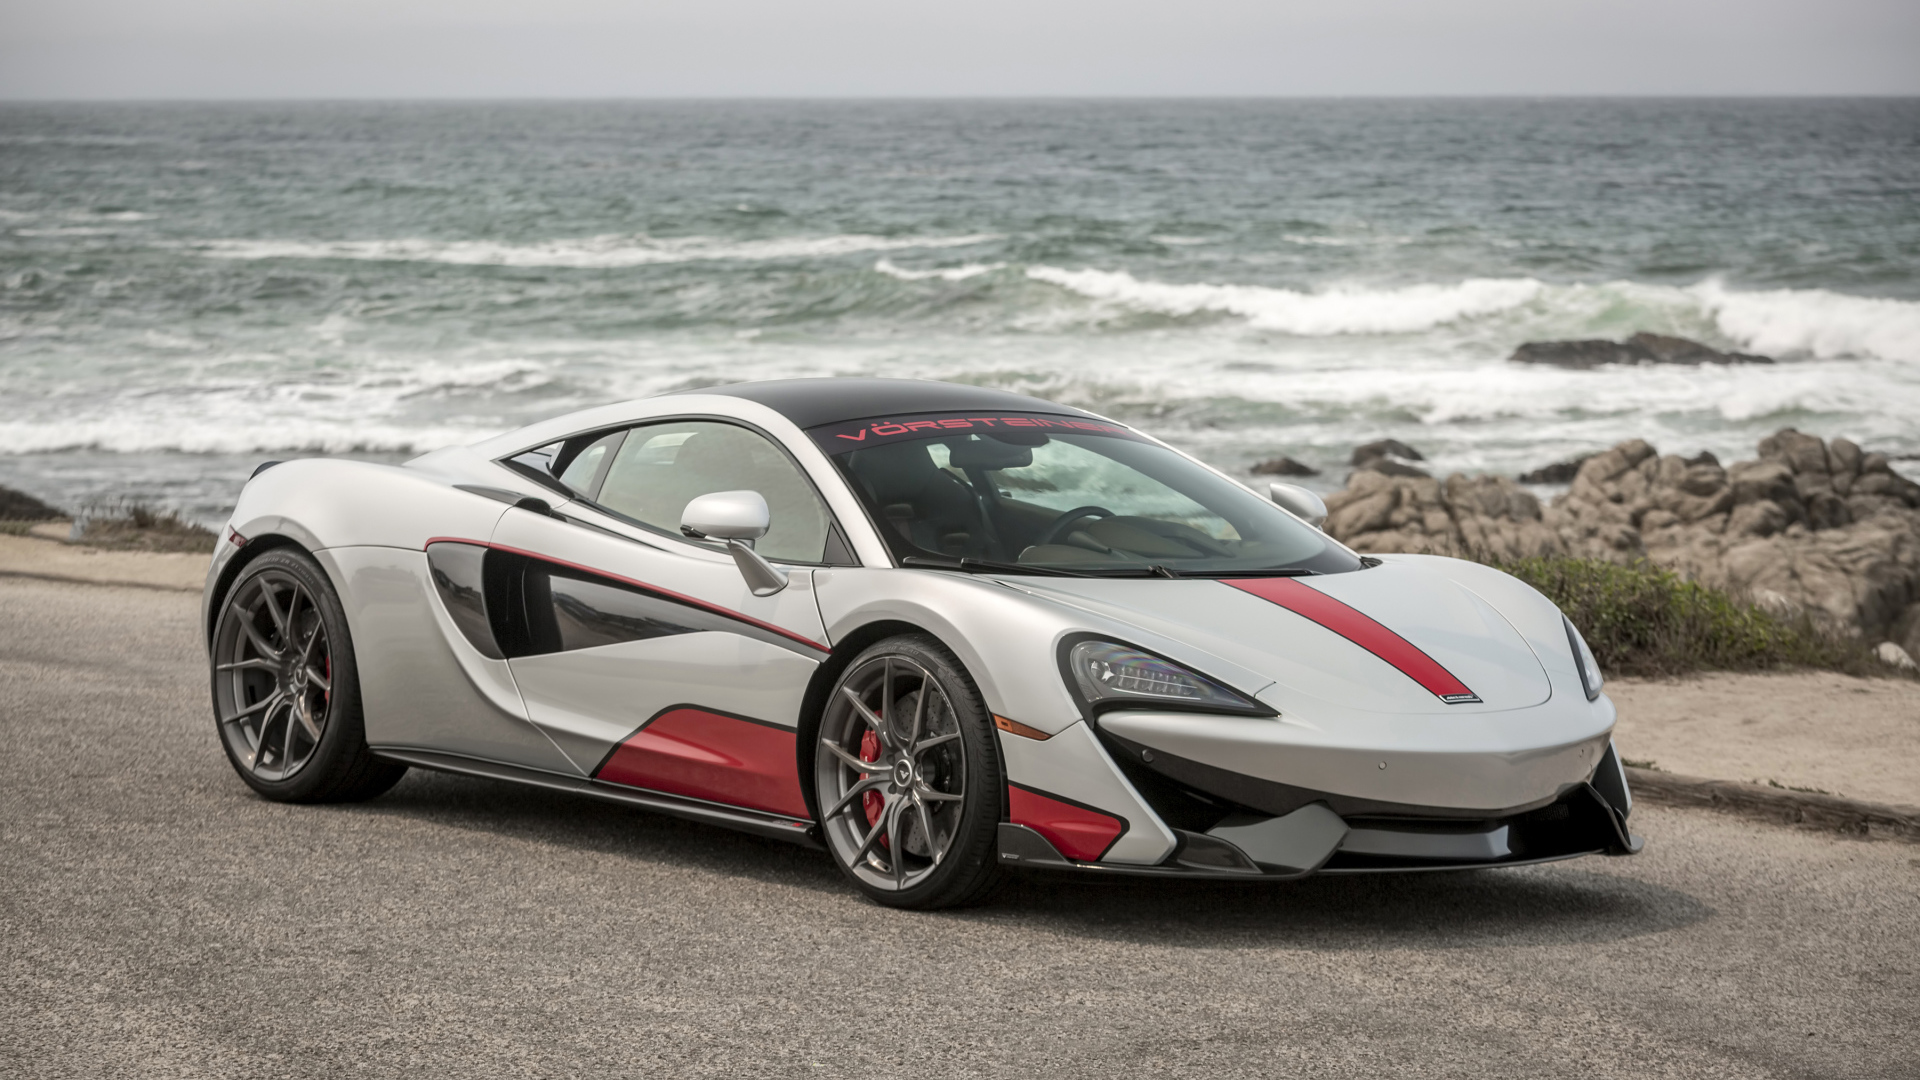 Sports car McLaren 570S on the background of the ocean